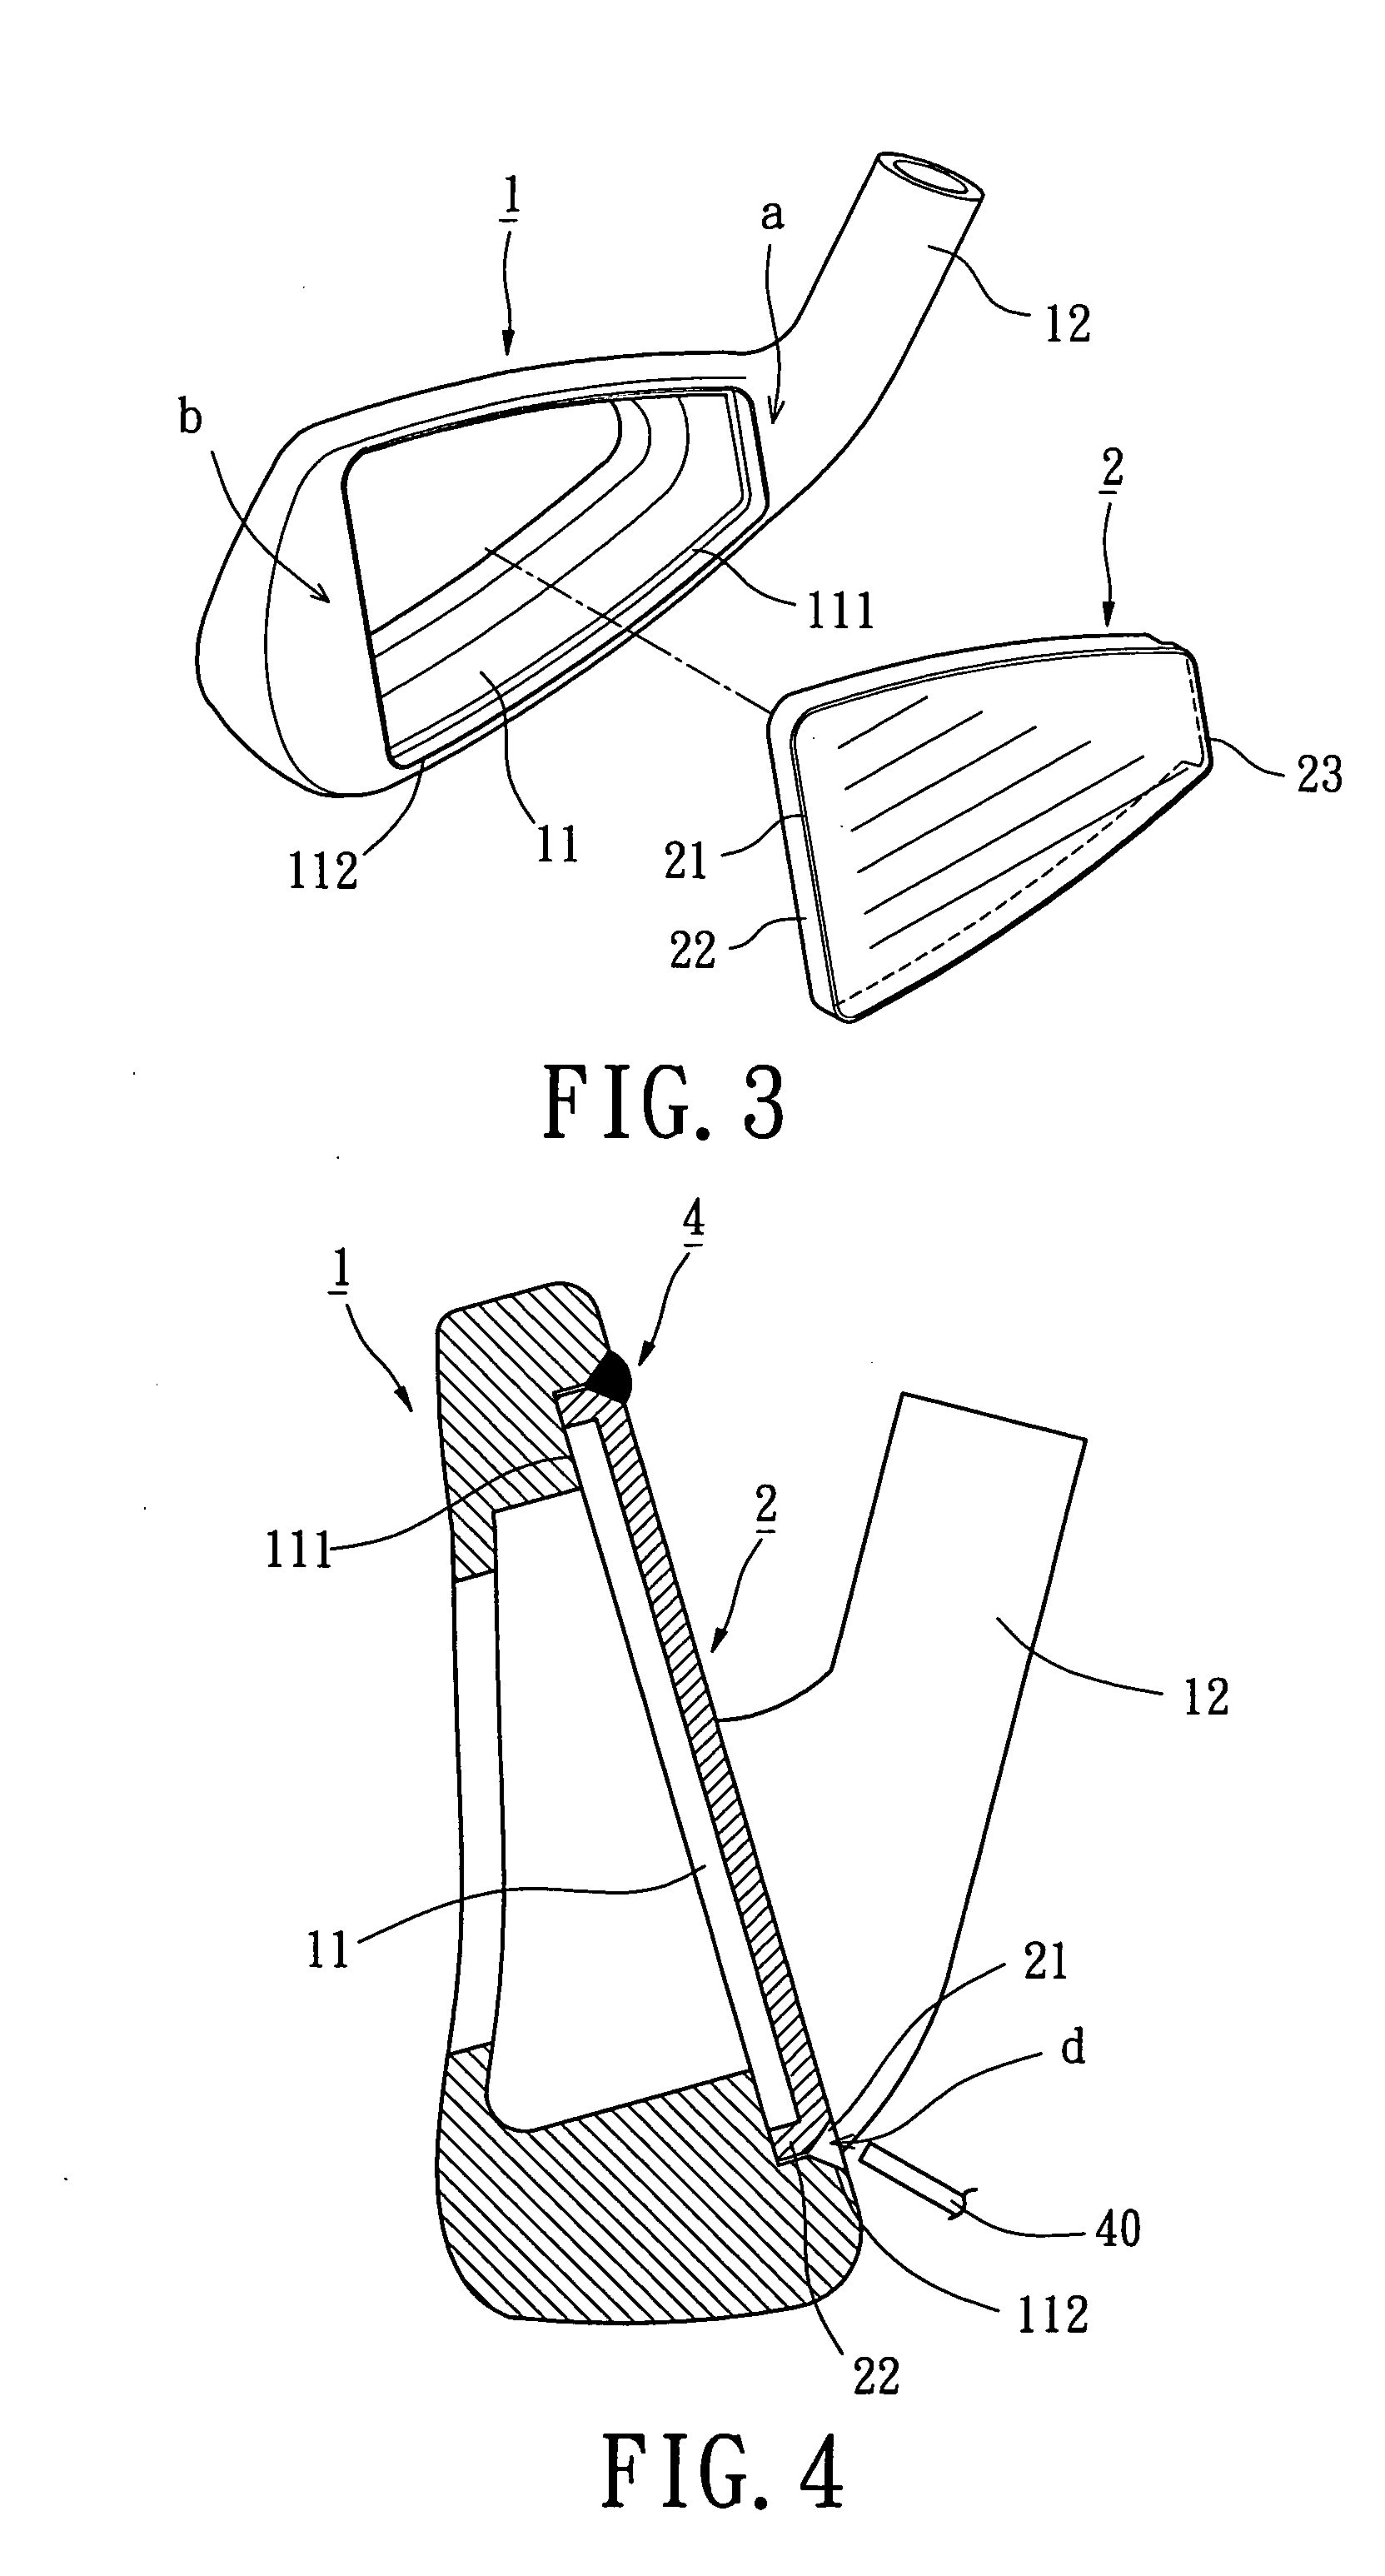 Upright bent edge structure of a striking plate for combing with a golf club head body